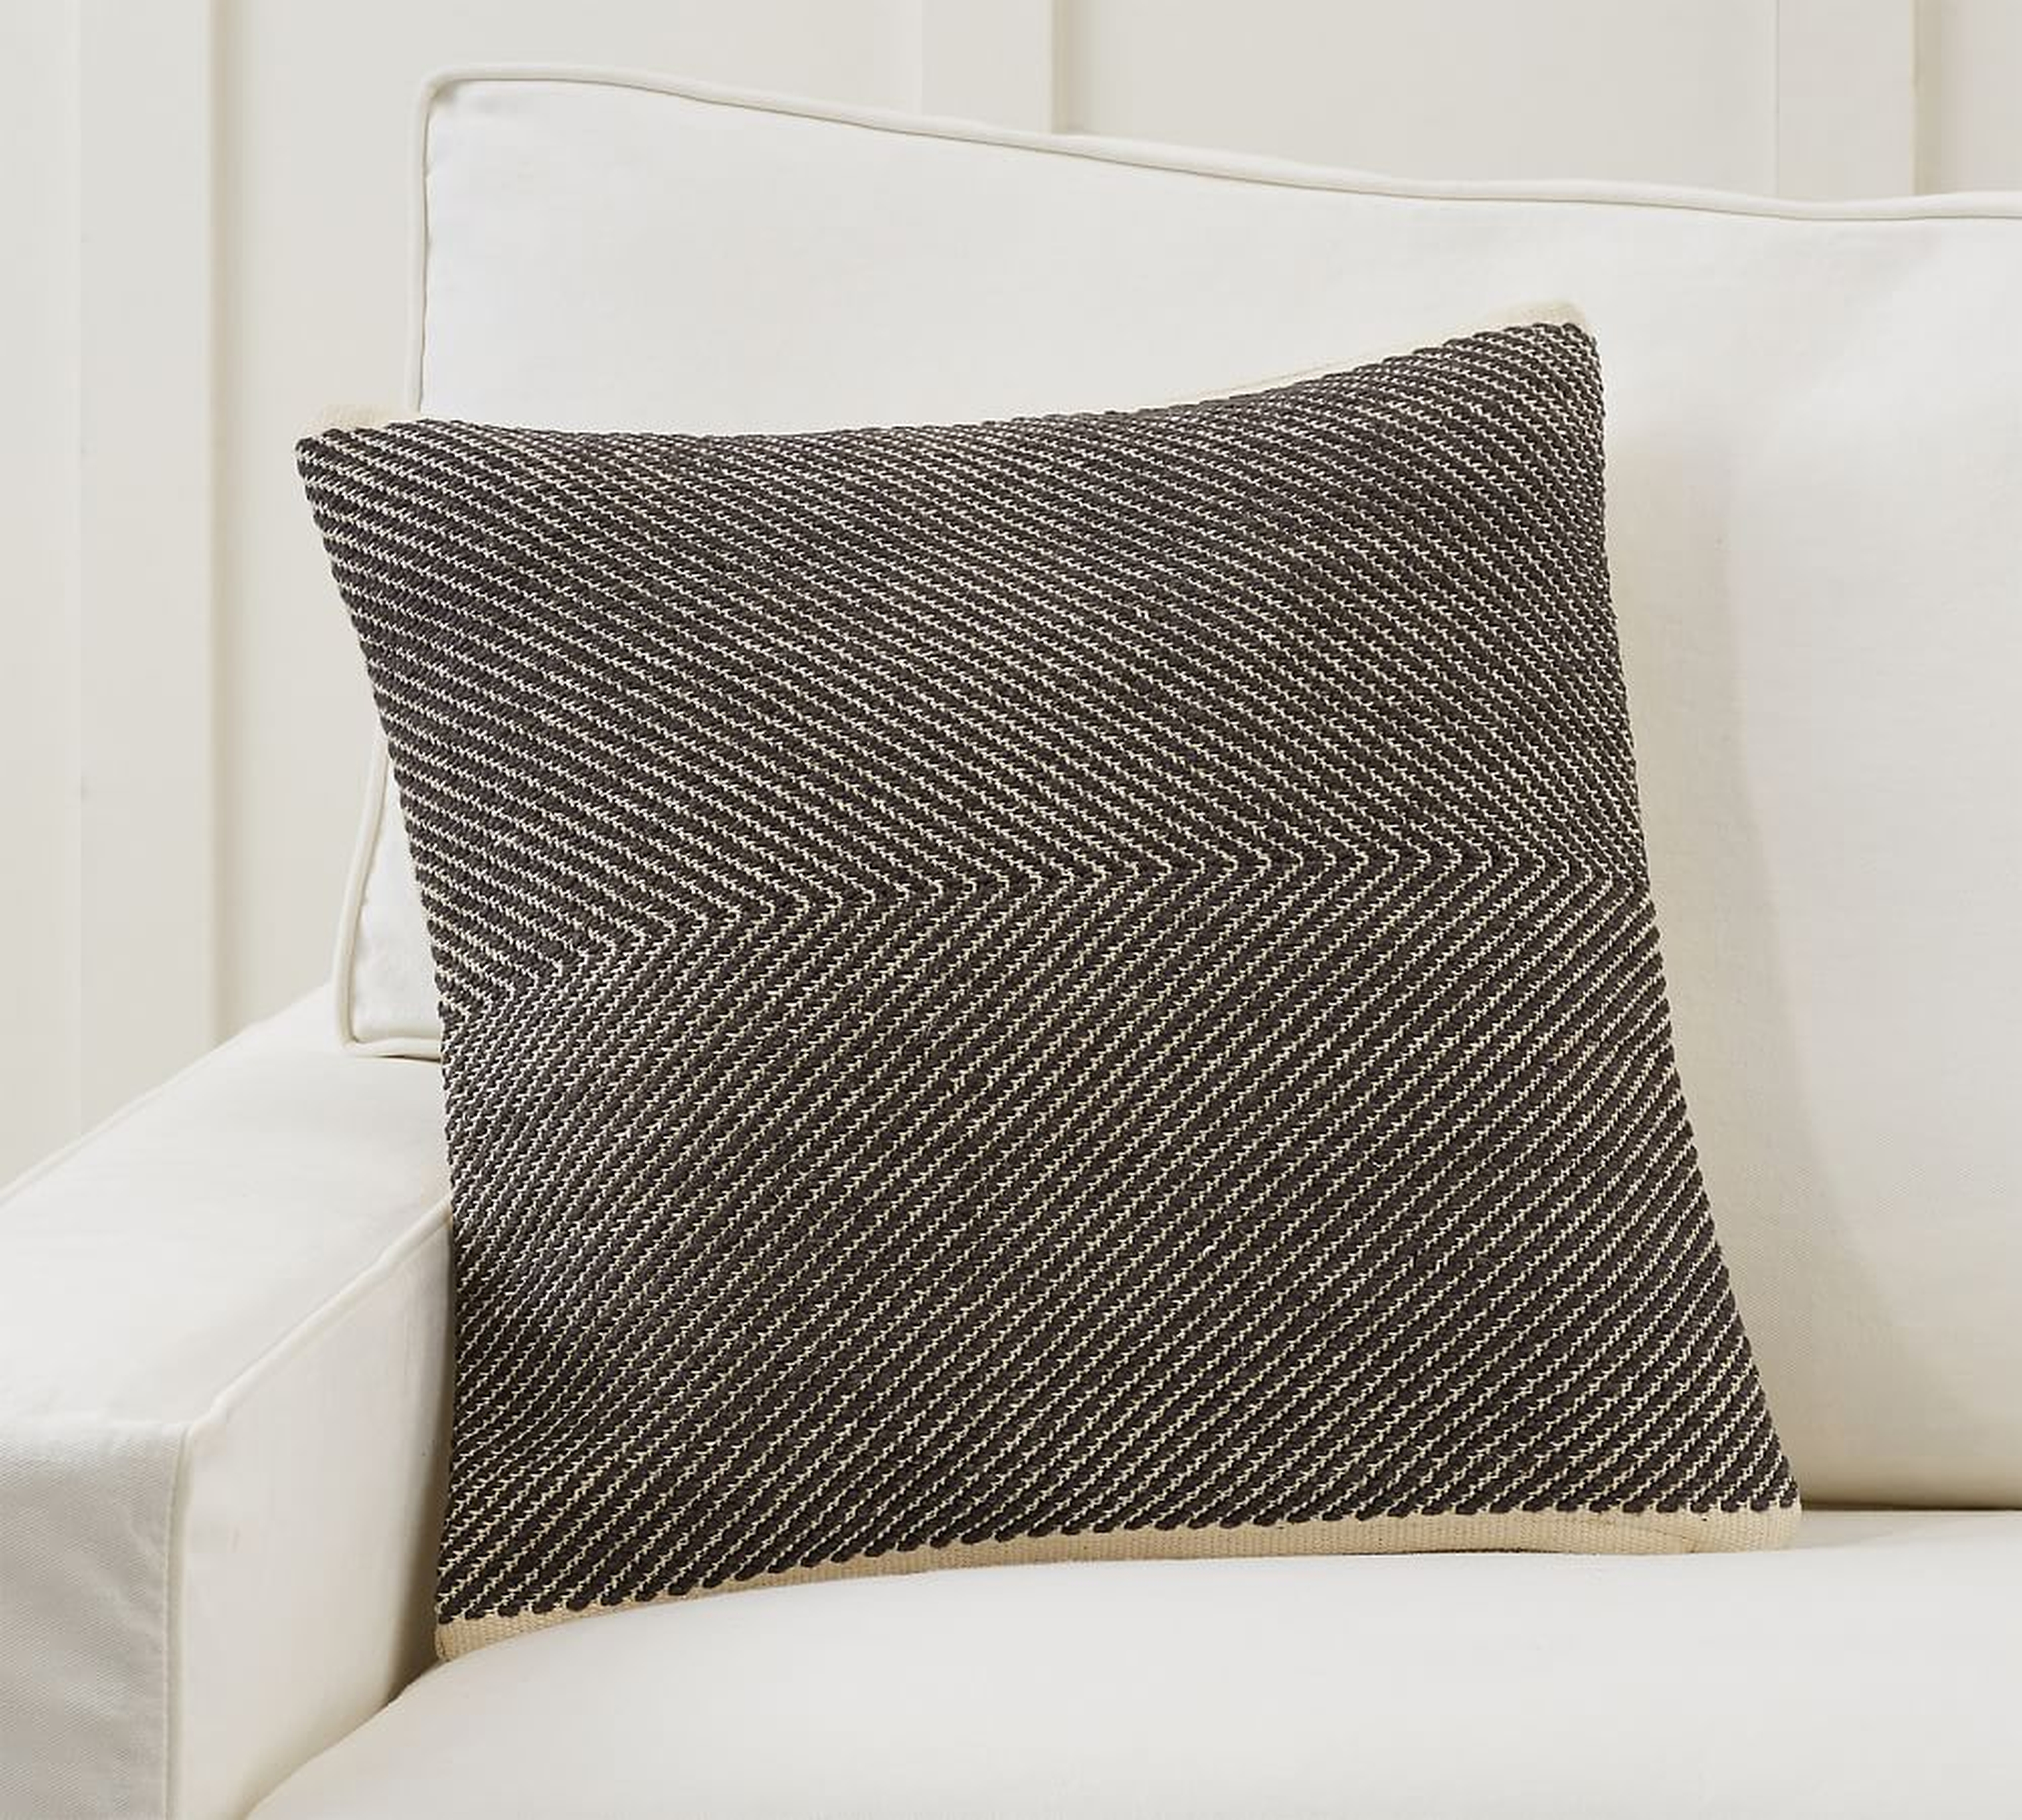 Ciara Textured Pillow Cover, 20 x 20", Charcoal - Pottery Barn